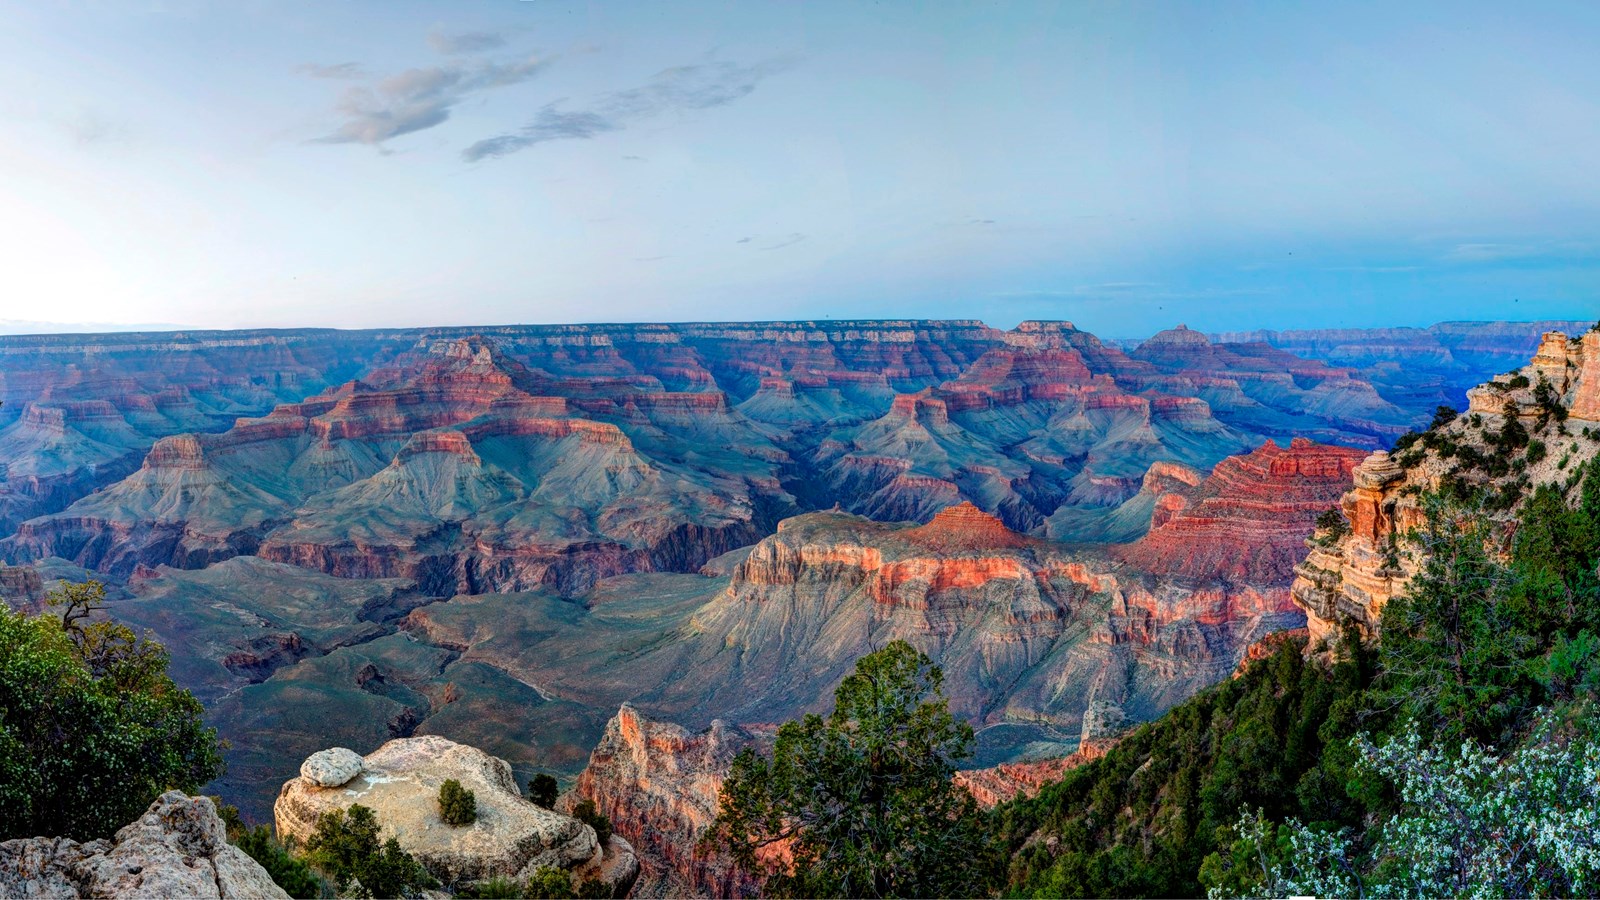 Under a pale blue sky, the landscape of Grand Canyon is illuminated by the fading light of sunset.